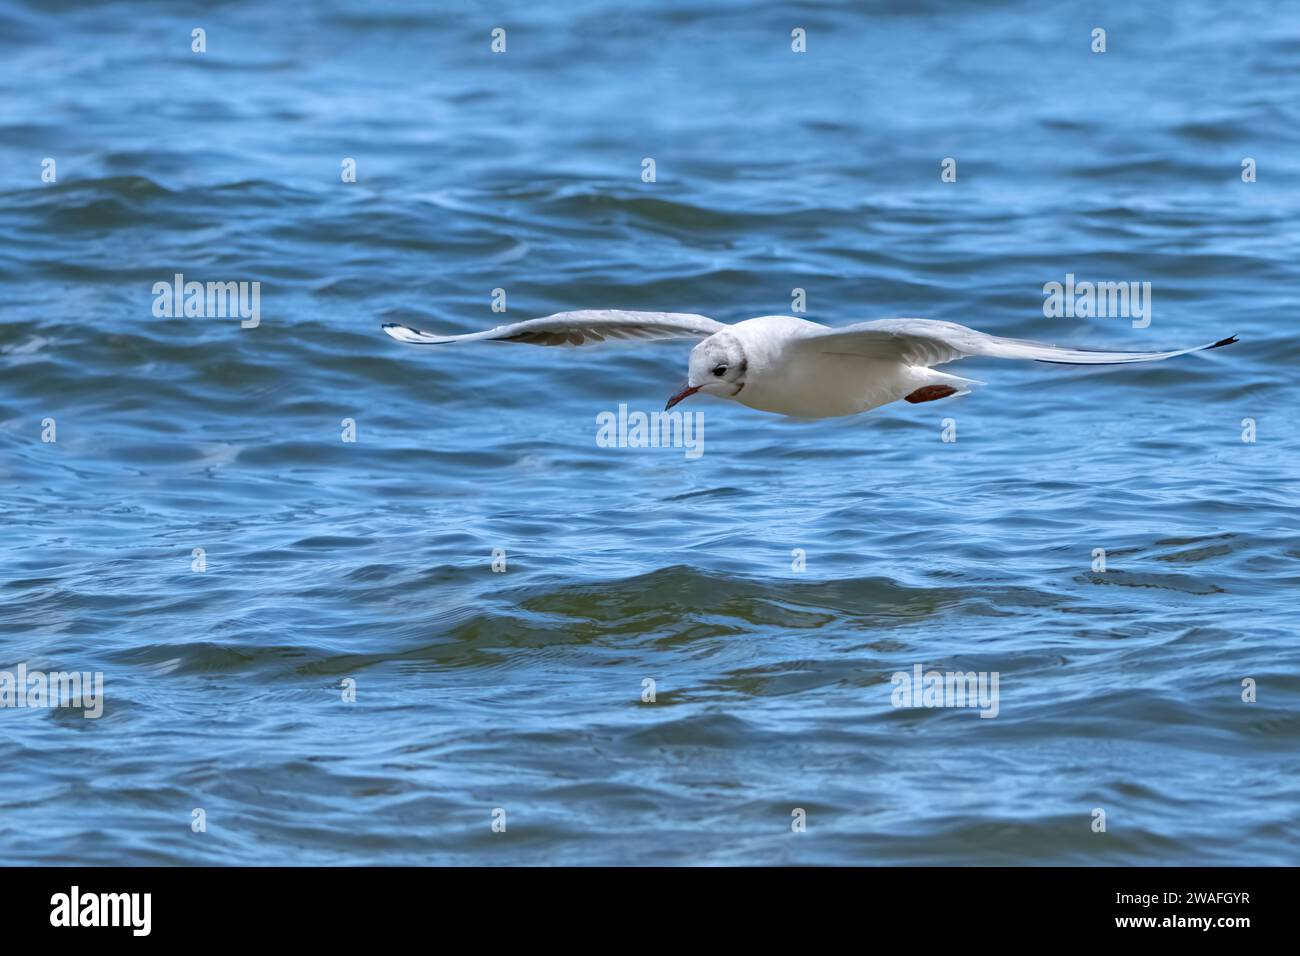 Black-headed gull (Chroicocephalus ridibundus) flying with outstretched wings over blue water Stock Photo